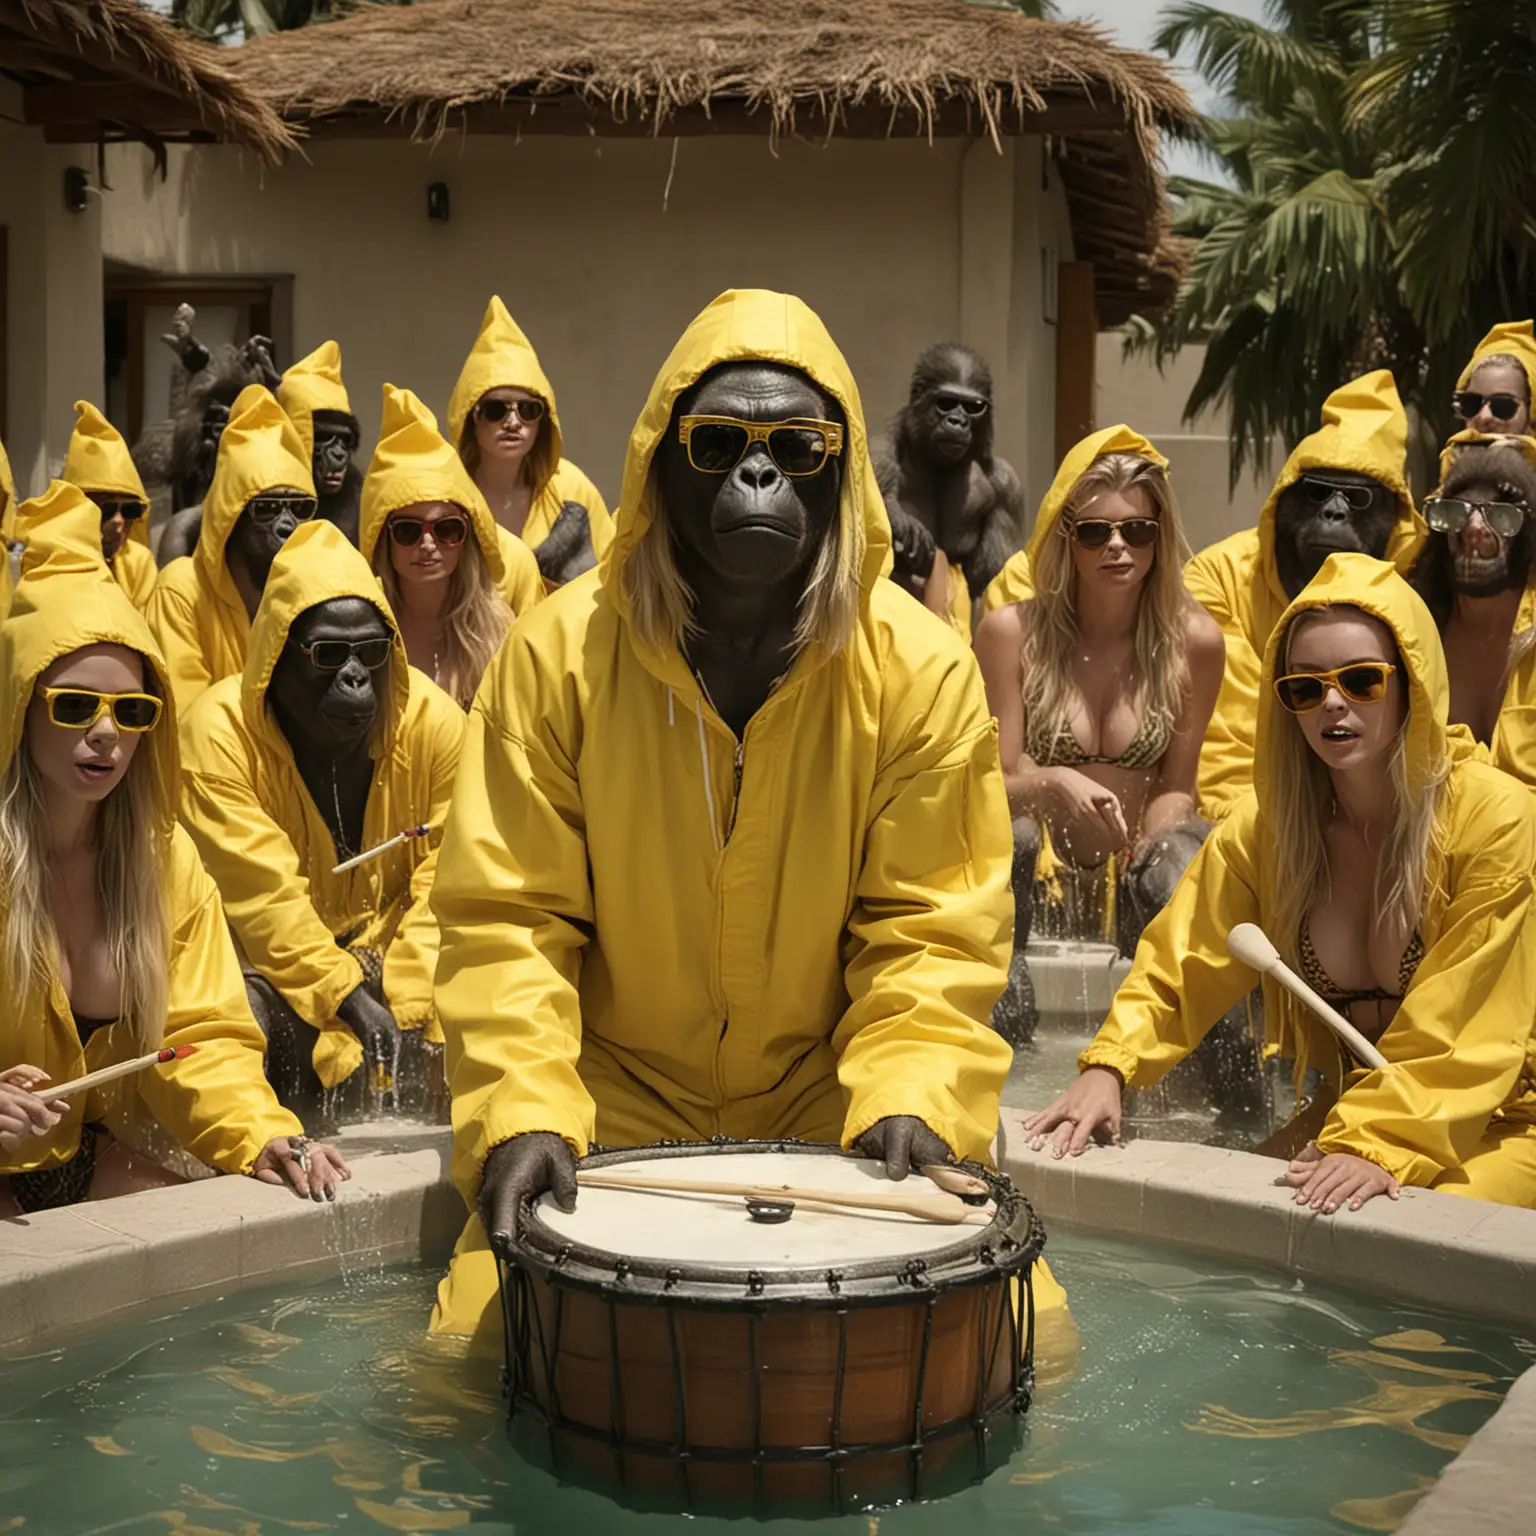 Gorilla in Yellow Jumpsuit Playing African Drums in Jacuzzi with Blonde Women